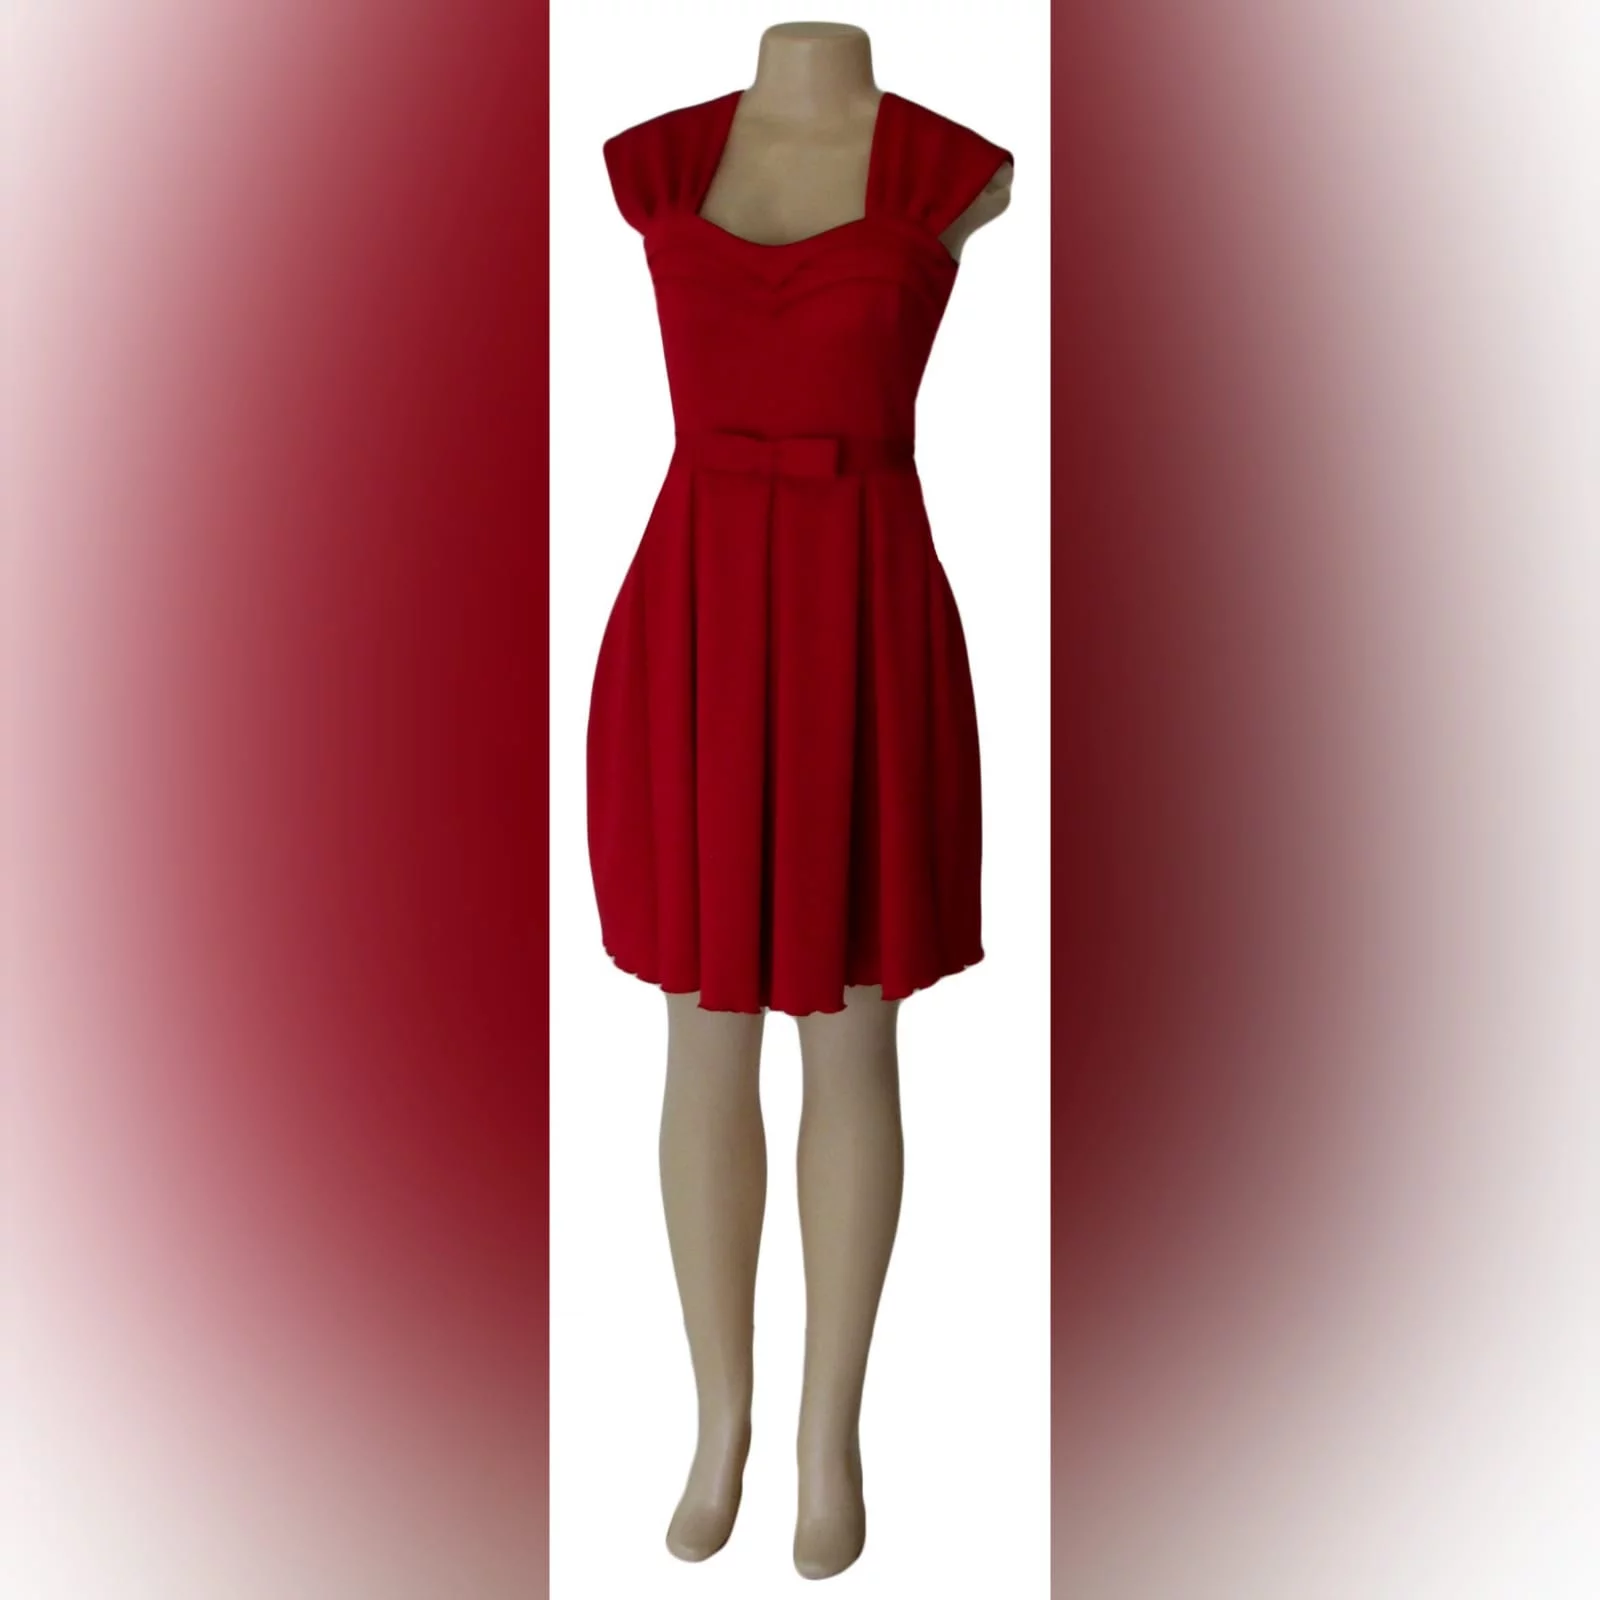 Short red pleated evening dress 1 short red pleated evening dress with a pleated sweetheart neckline and a detachable belt with bow detail